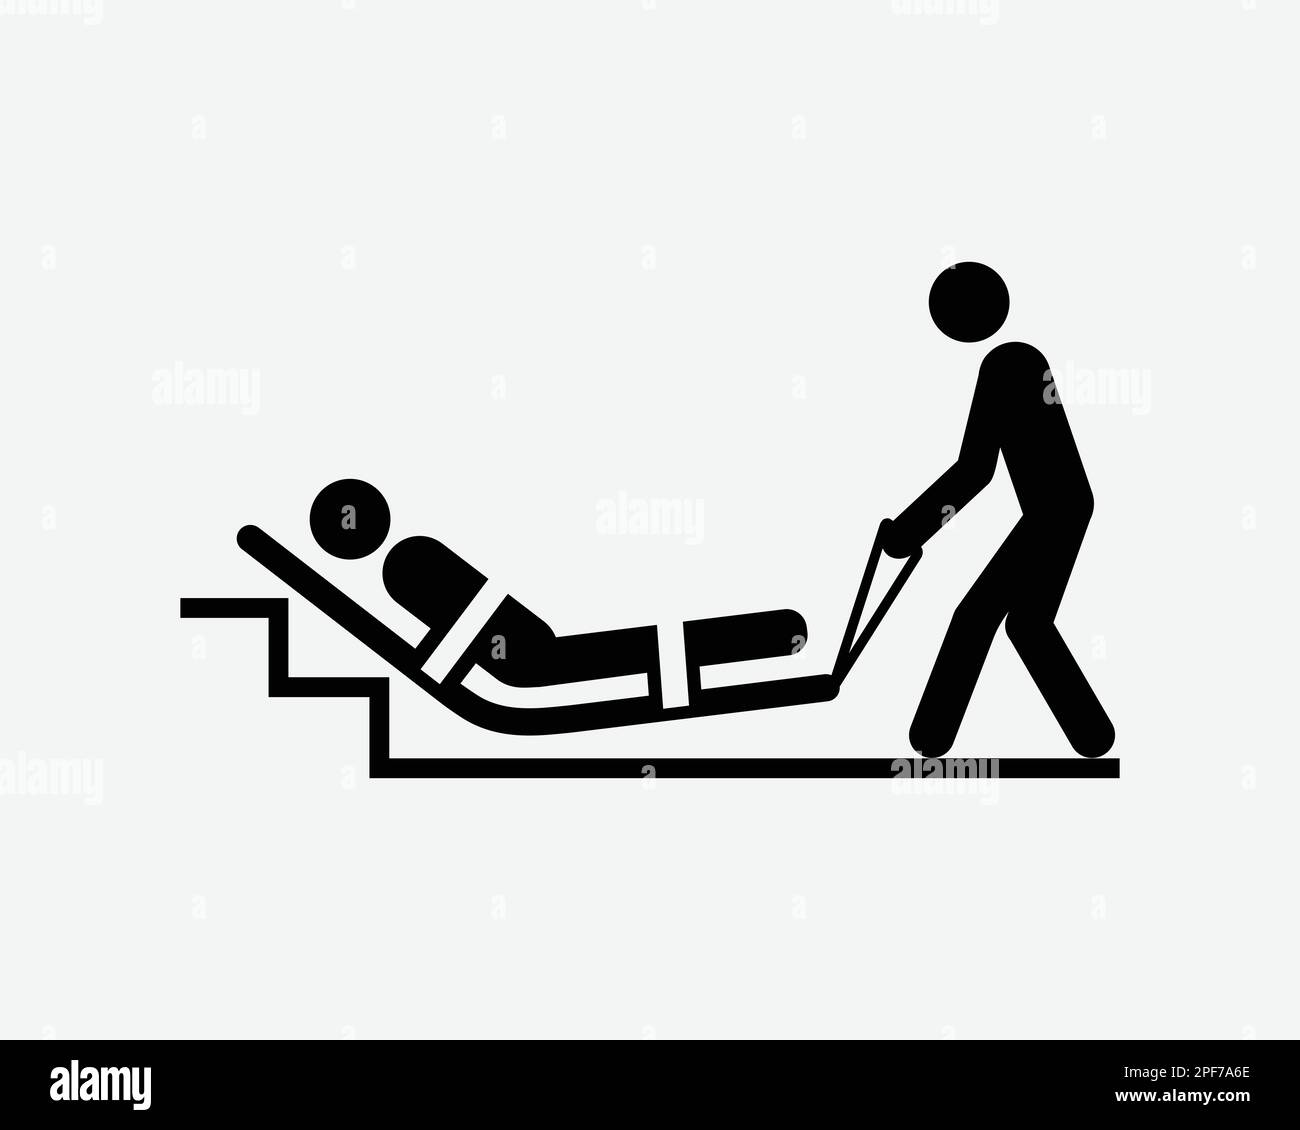 Emergency Evacuation Mattress Bed Rescue Injured Fire Black White Silhouette Sign Symbol Icon Clipart Graphic Artwork Pictogram Illustration Vector Stock Vector